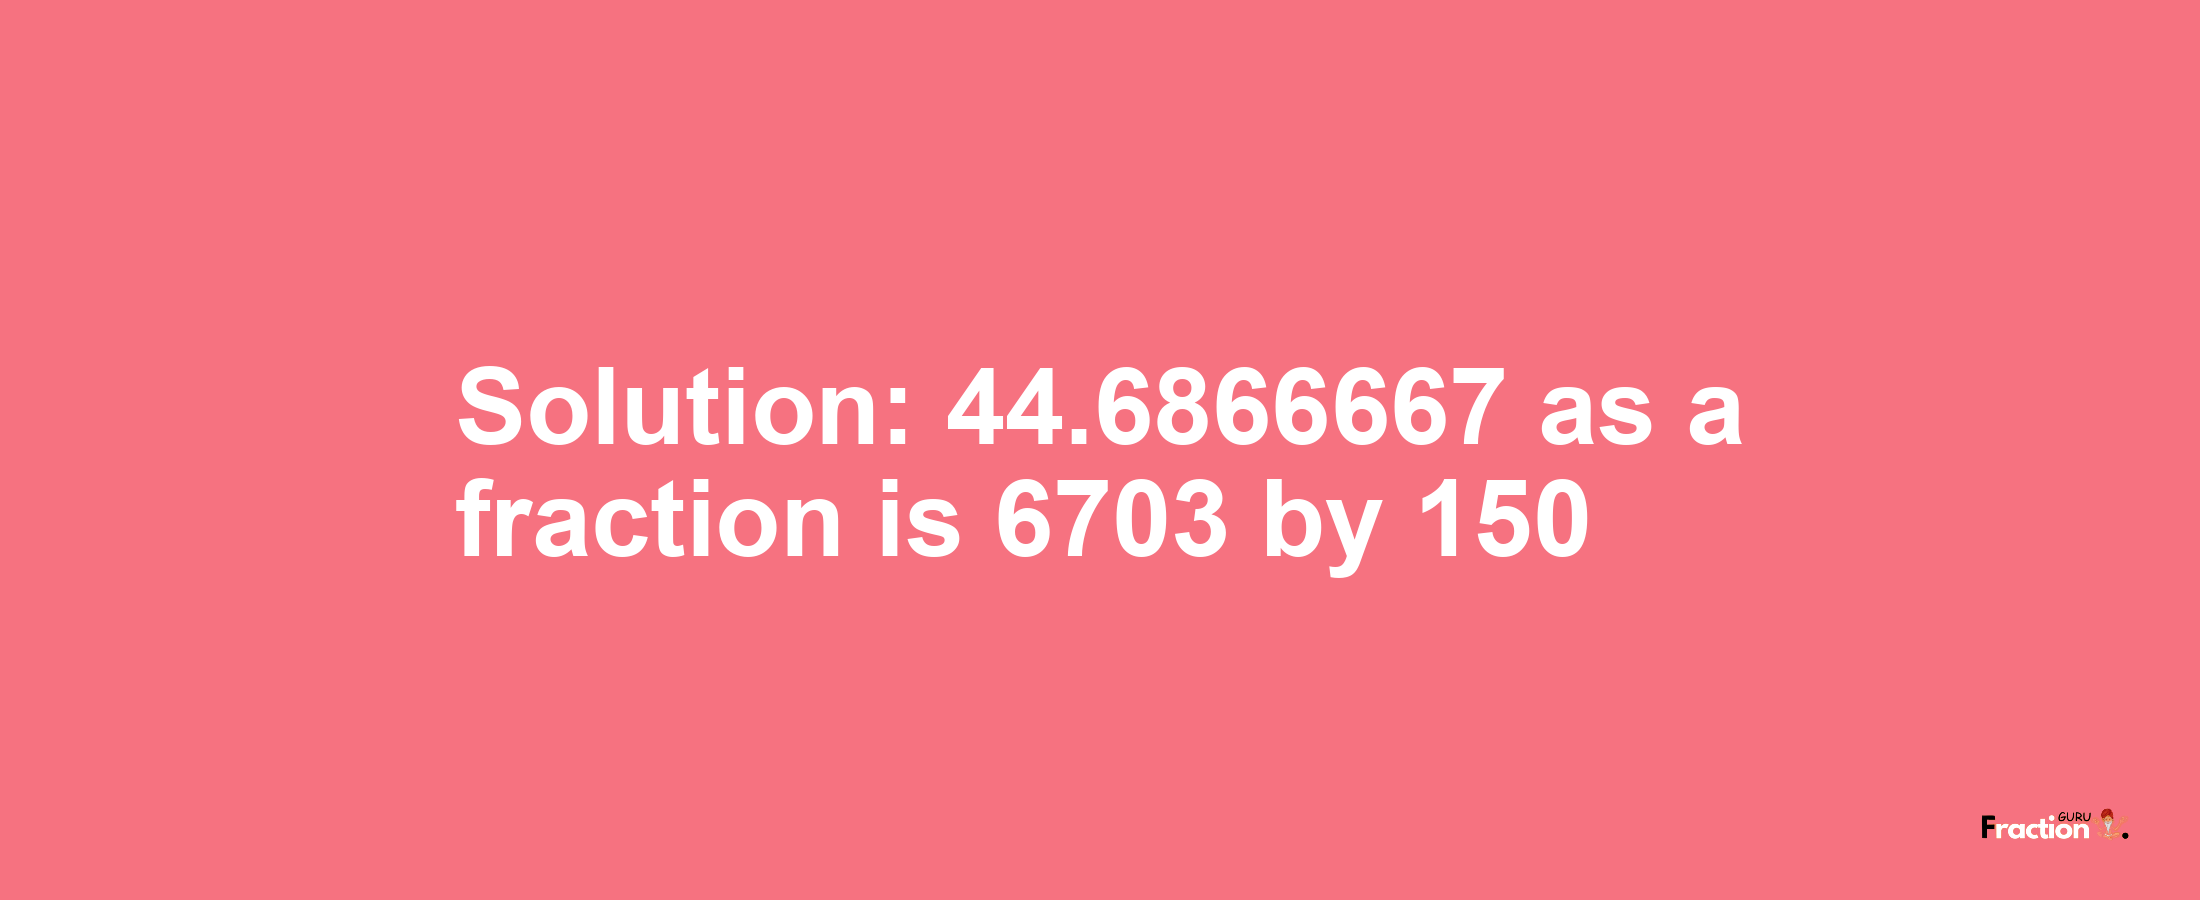 Solution:44.6866667 as a fraction is 6703/150